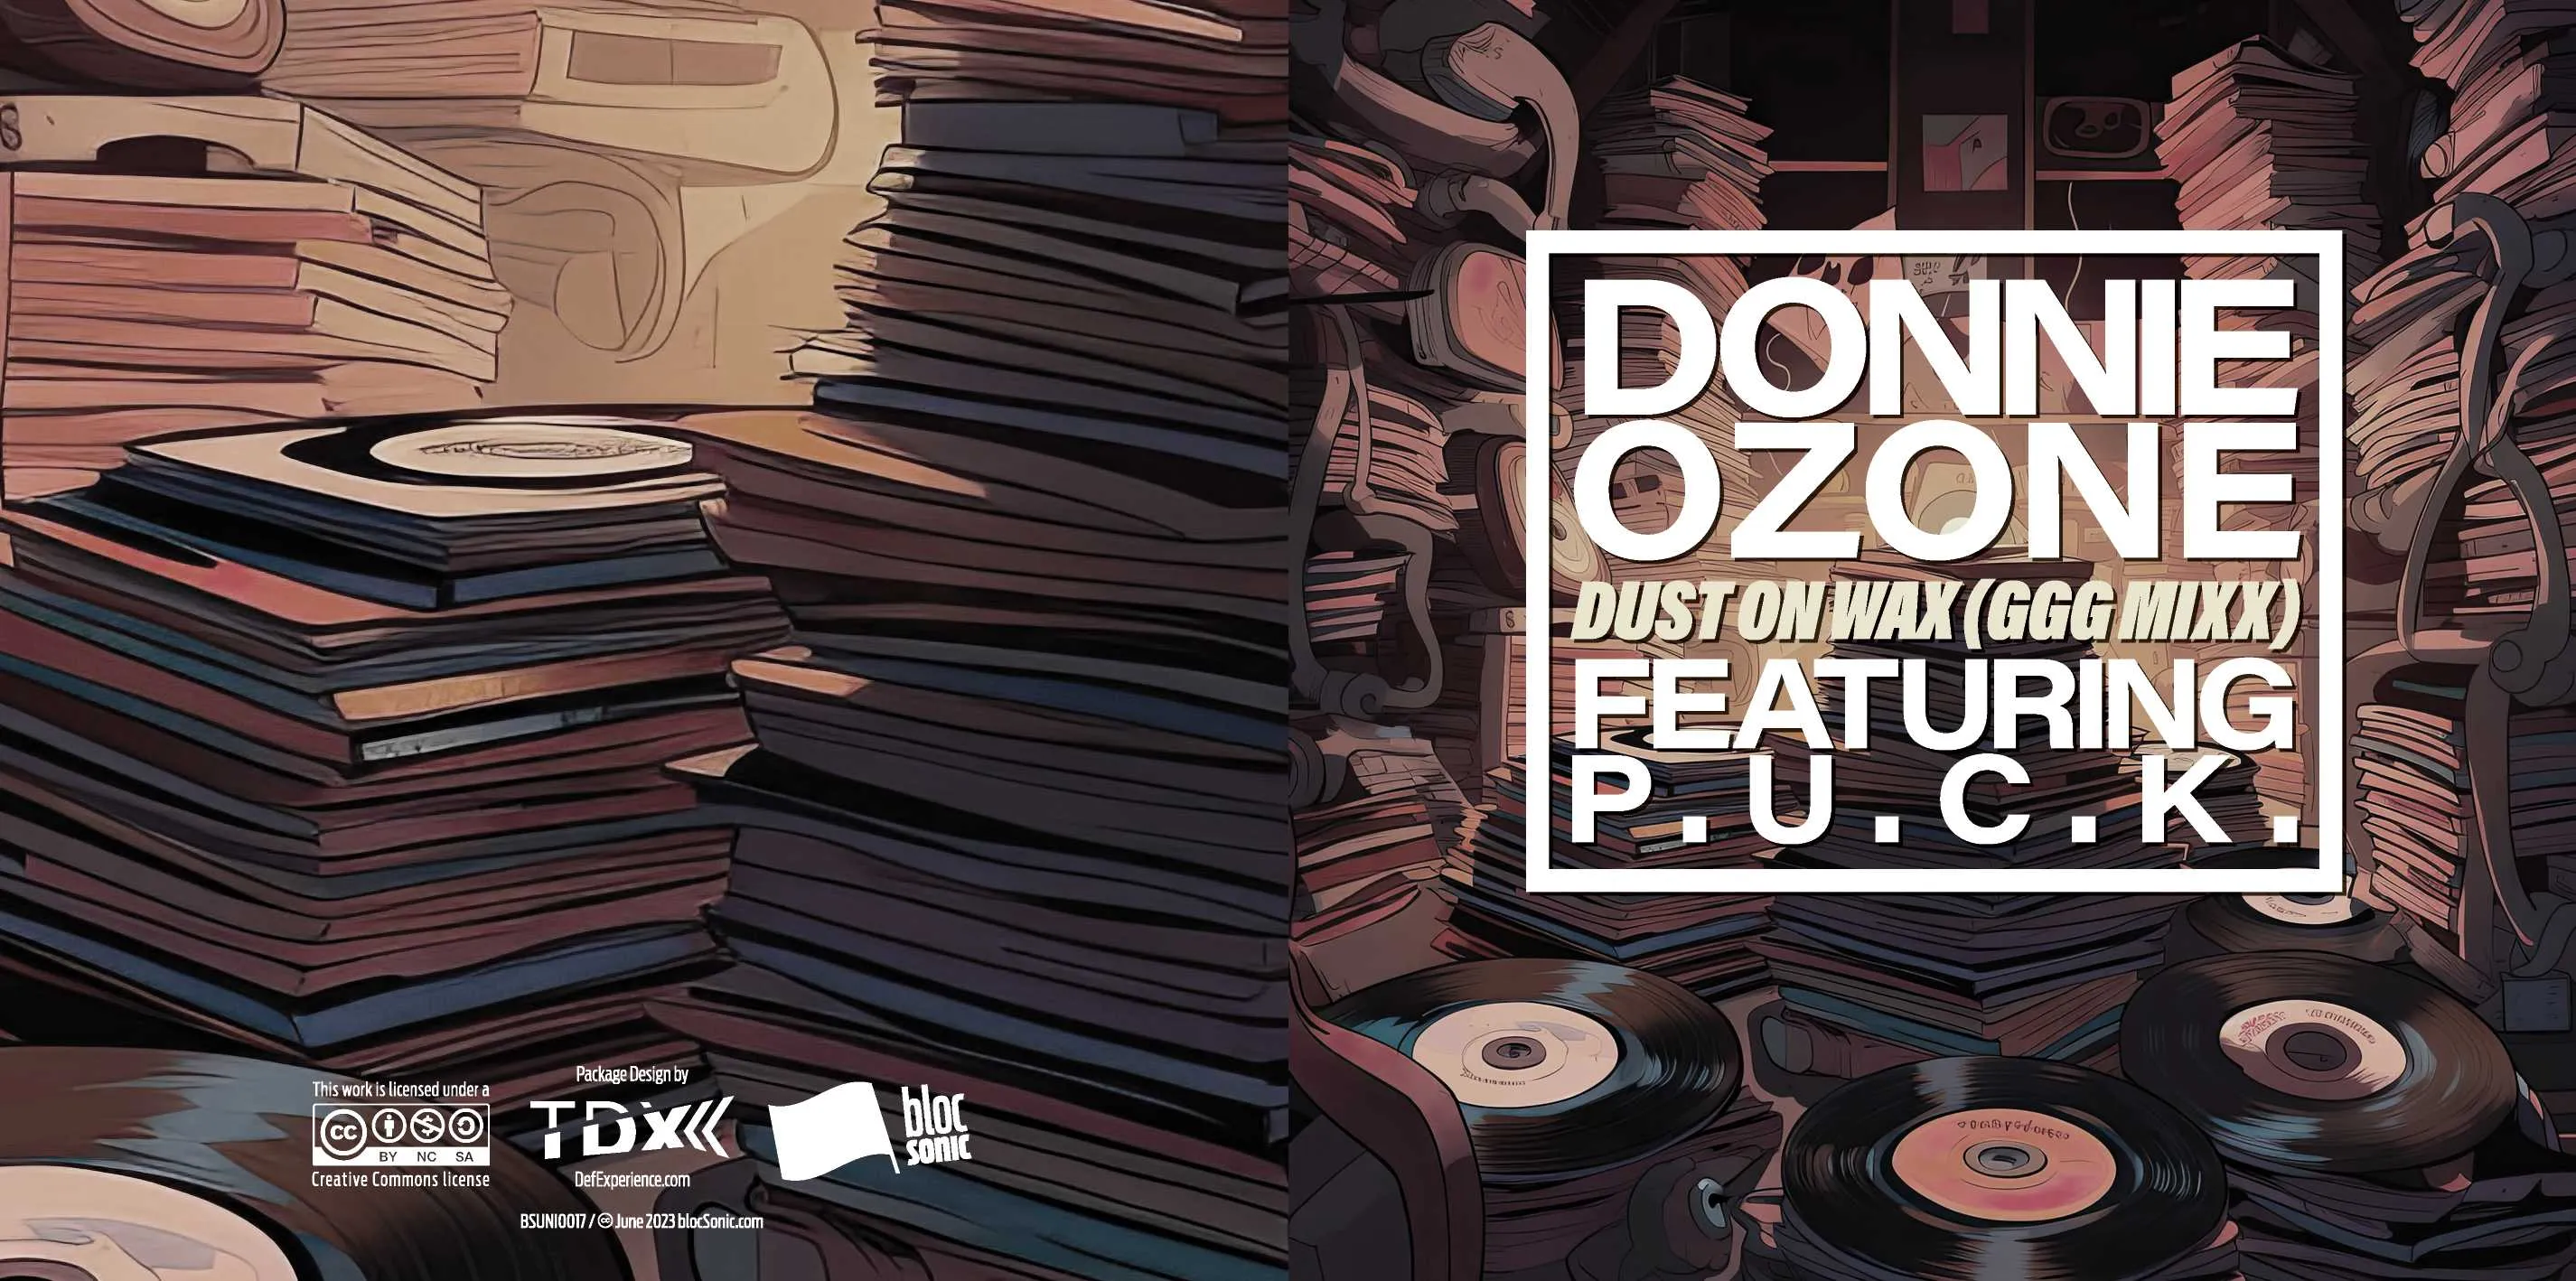 Album cover for “Dust On Wax (GGG MIXX) (Featuring P.U.C.K.)” by Donnie Ozone